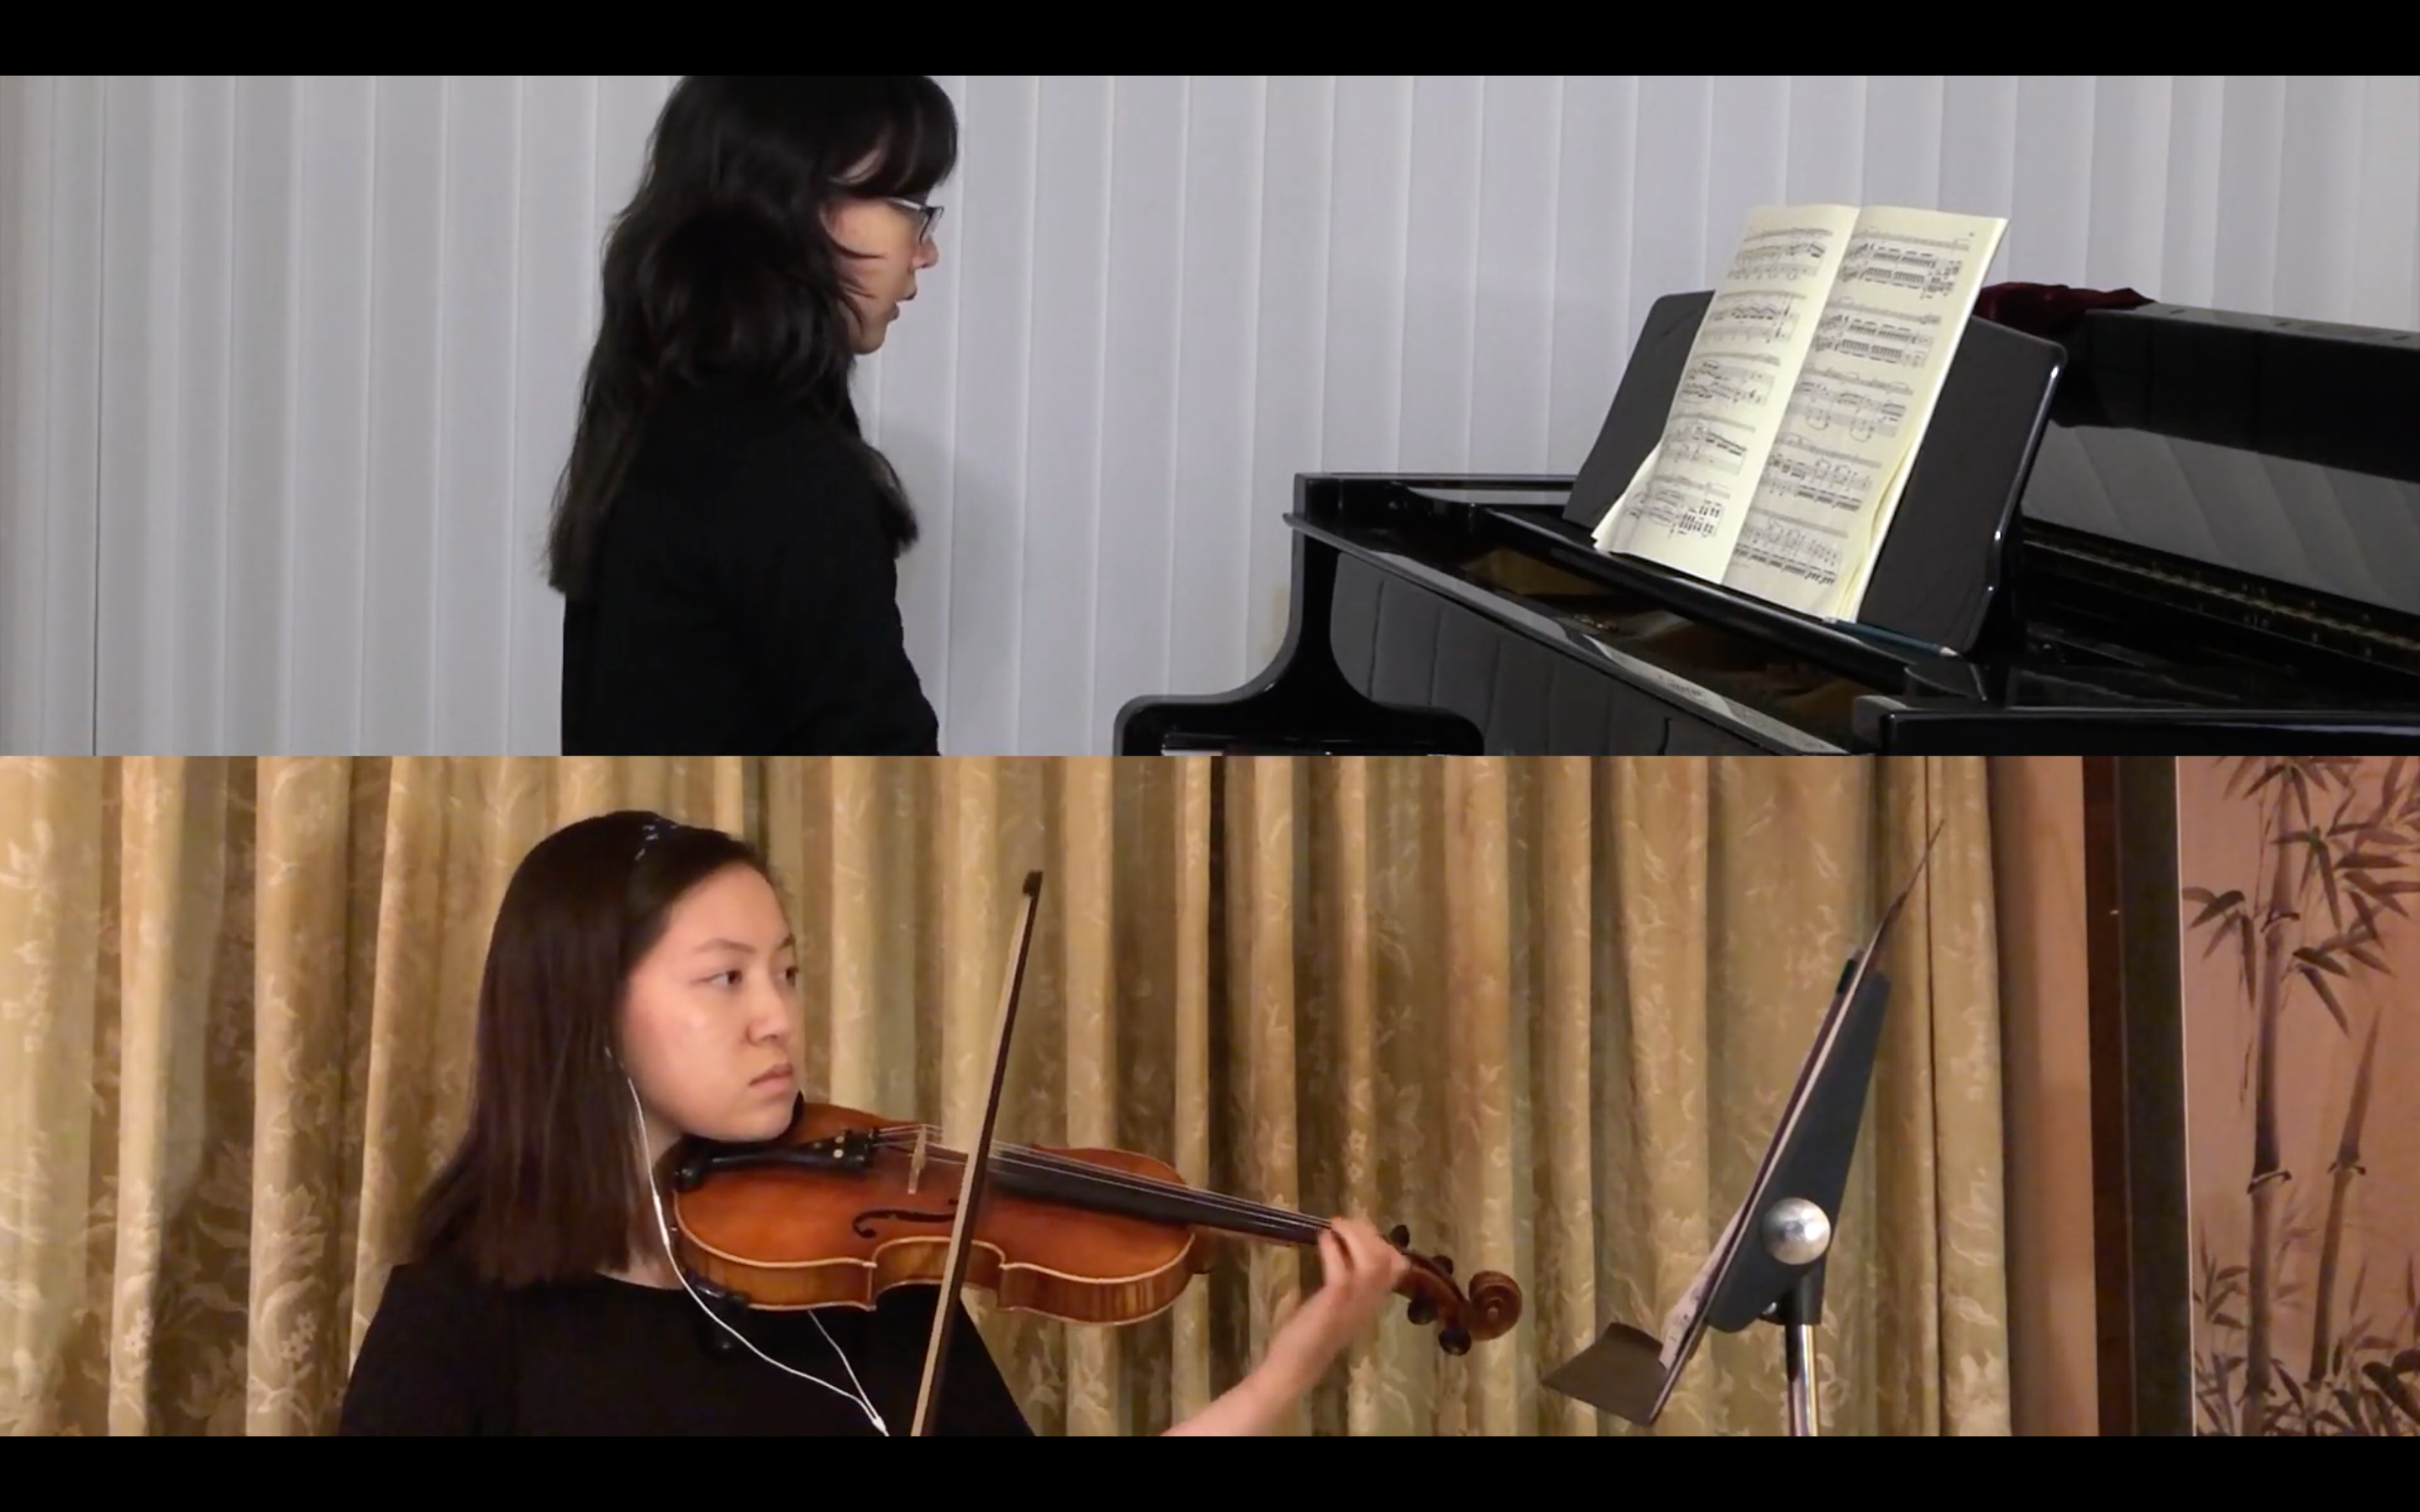 Zoom screens show Georgetown University Chamber Music Ensembles Program student pianist performing from Hong Kong at top, and violinist in the U.S. performing below.